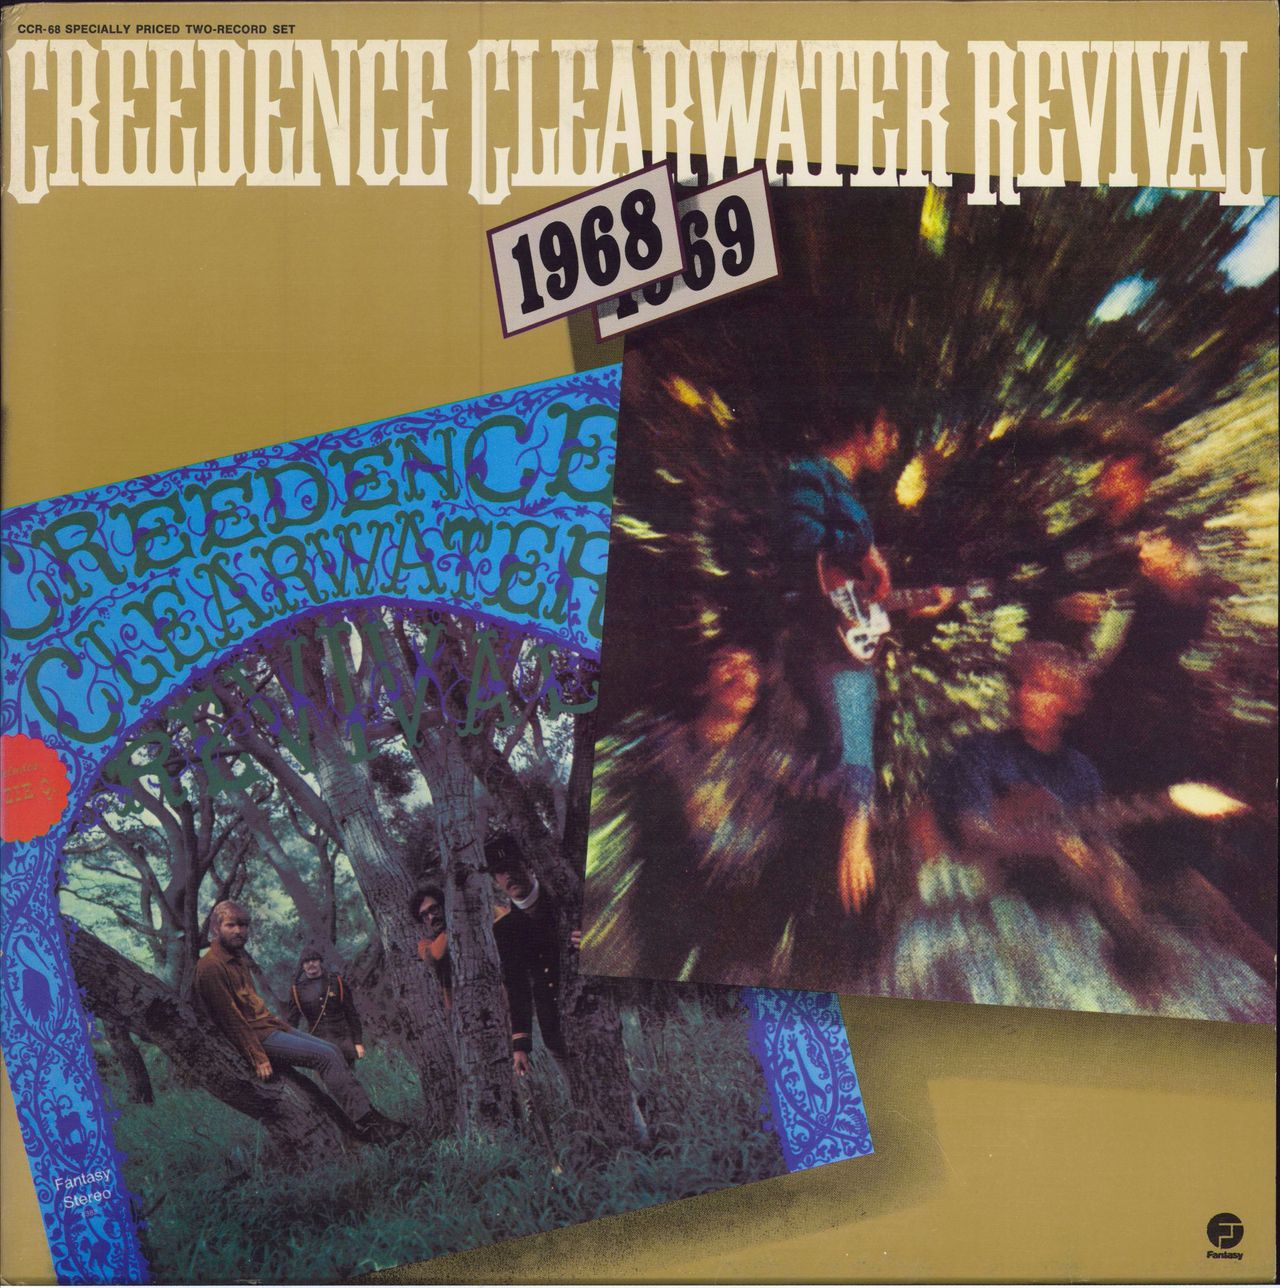 Creedence Clearwater Revival Creedence Clearwater Revival 1968/1969 US 2-LP vinyl record set (Double LP Album) CCR-68